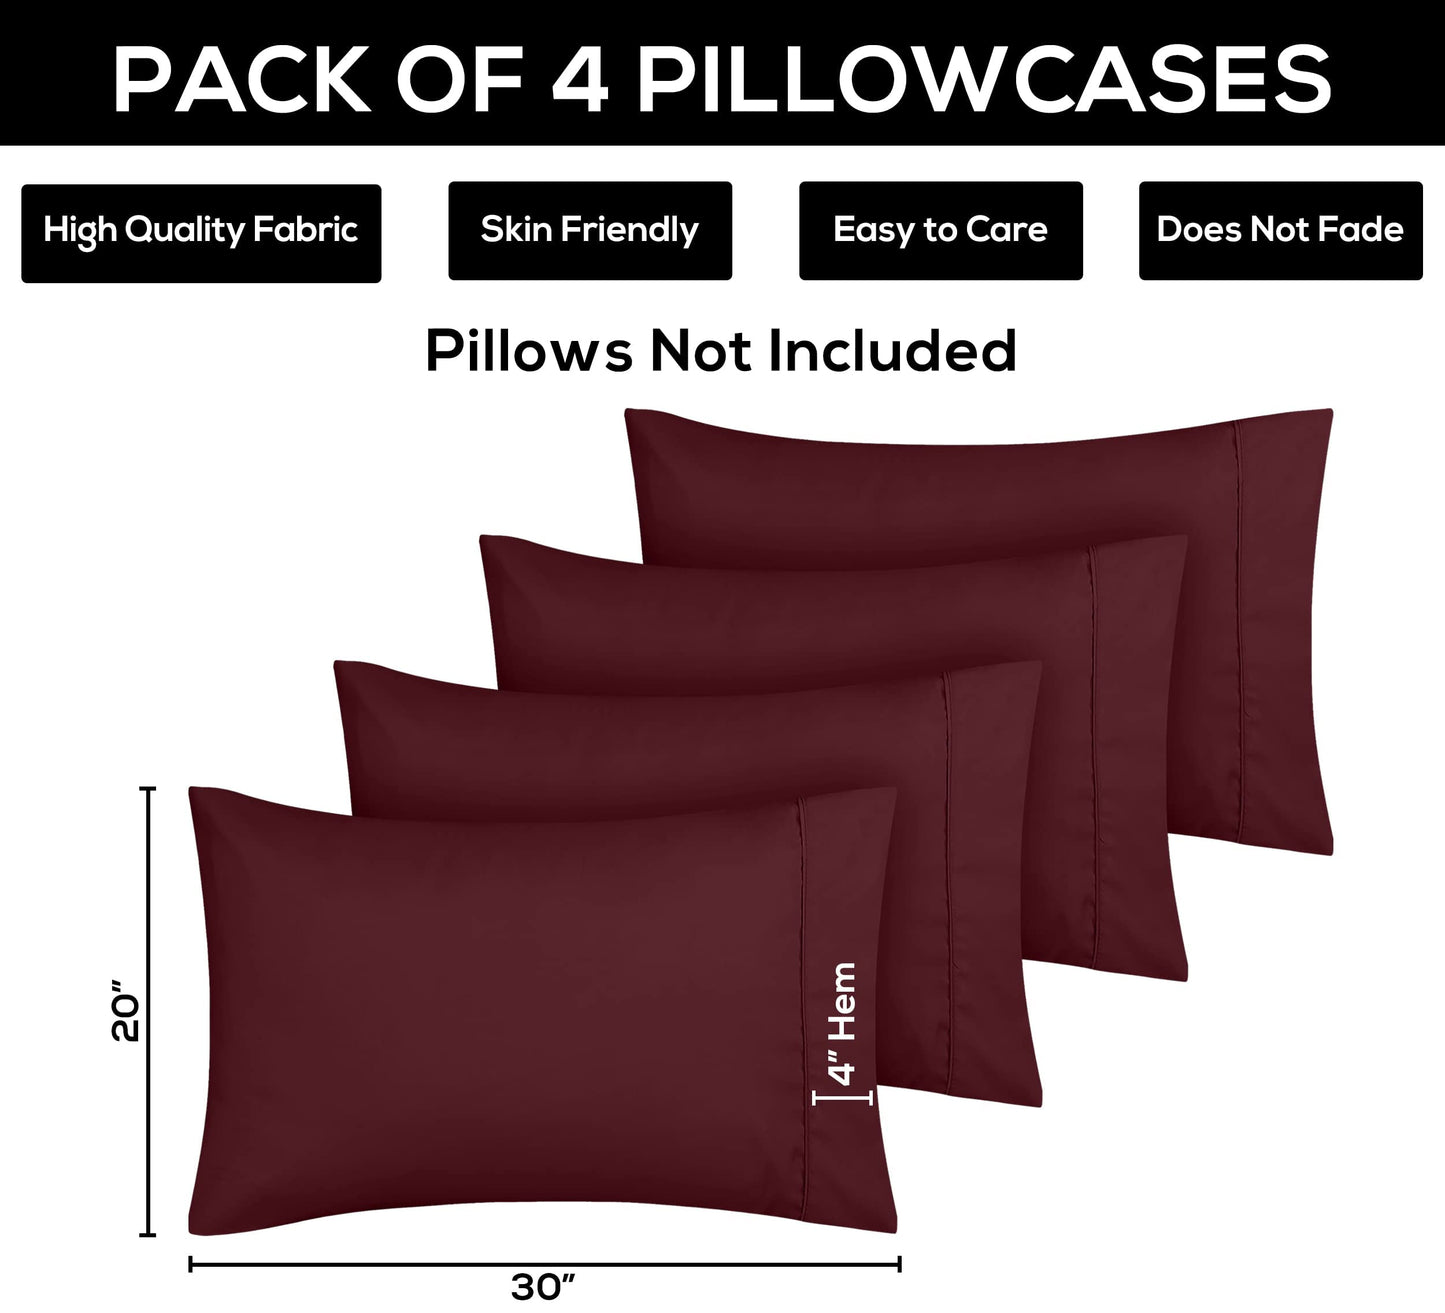 Utopia Bedding Queen Pillow Cases - 4 Pack - Envelope Closure - Soft Brushed Microfiber Fabric - Shrinkage and Fade Resistant Pillow Cases Queen Size 20 X 30 Inches (Queen, Burgundy/Red)